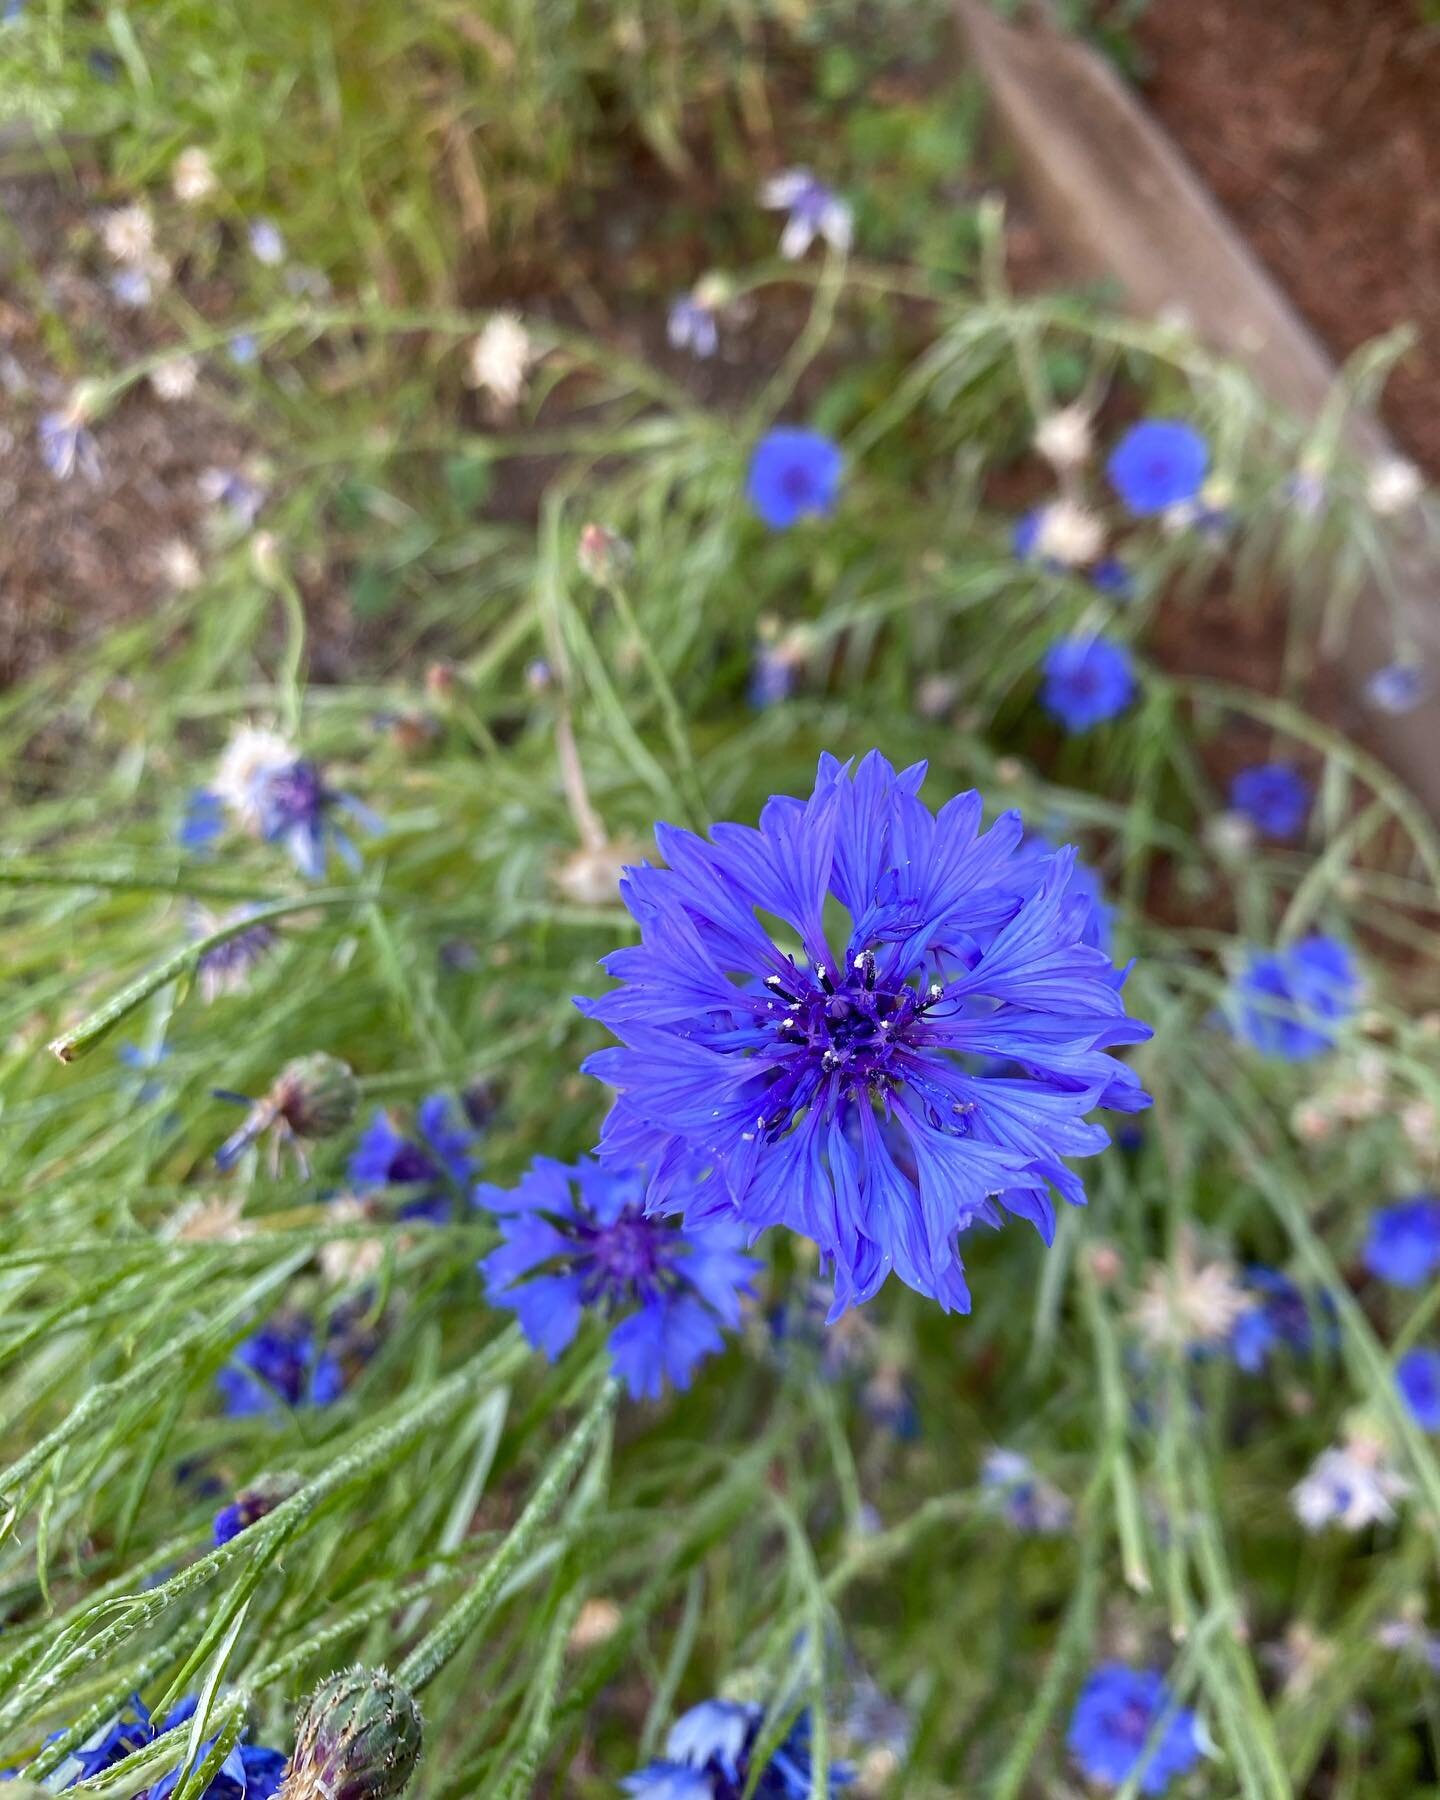 #funfactfriday Looks can be deceiving! All of these beautiful flowering plants are in fact non-native and invasive. They were introduced on purpose, but escaped  their intended settings with negative consequences.😱

Slide 1: cornflower
Slide 2: comm